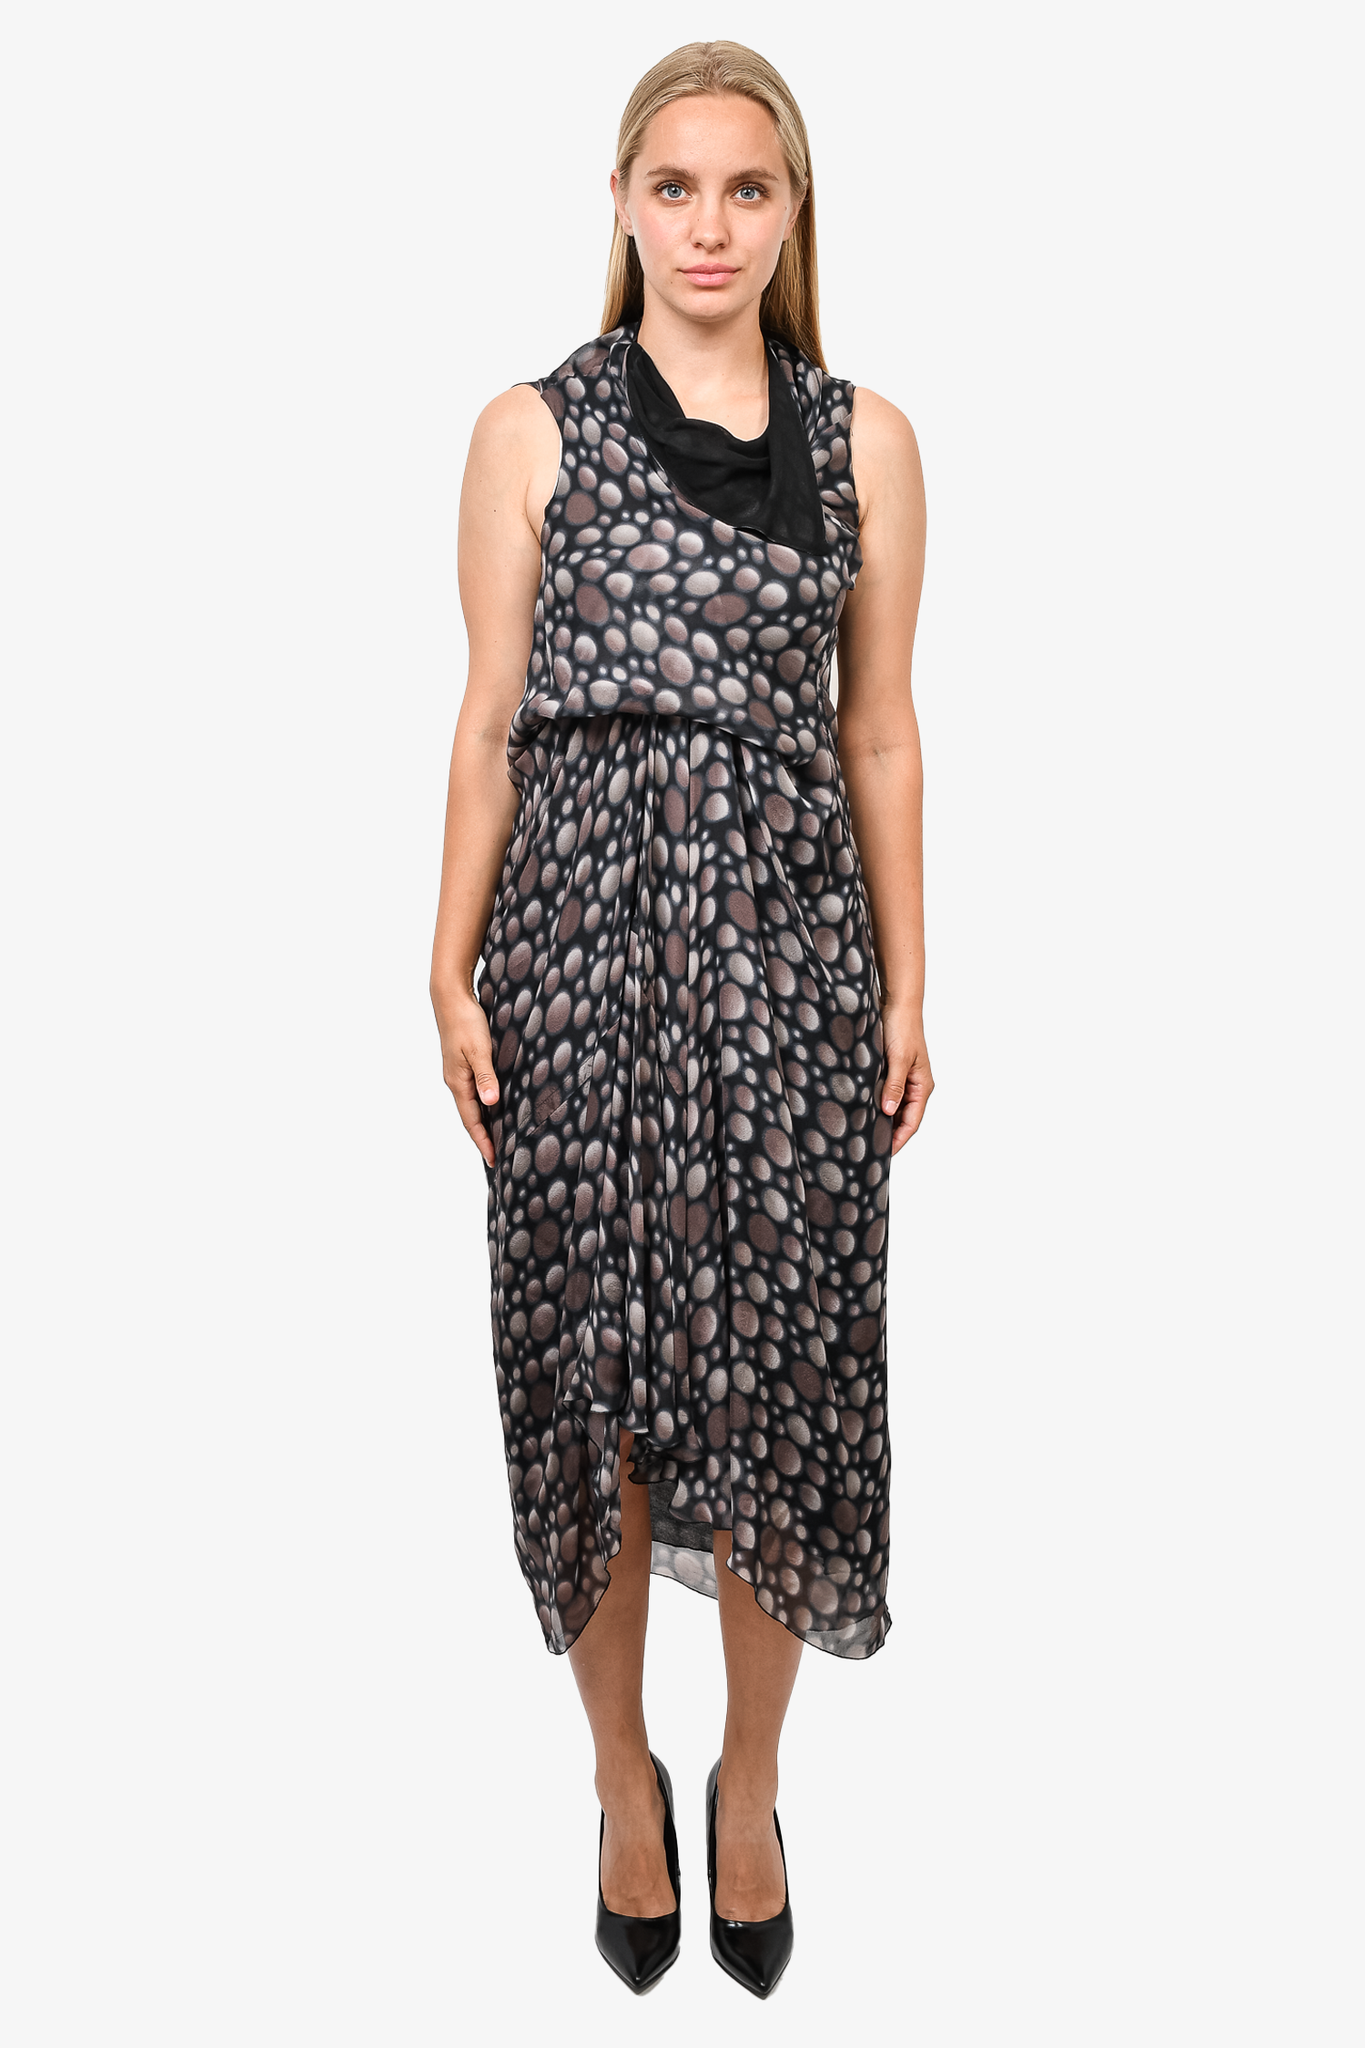 Rick Owens Black and Brown Silk Spotted Draped Dress